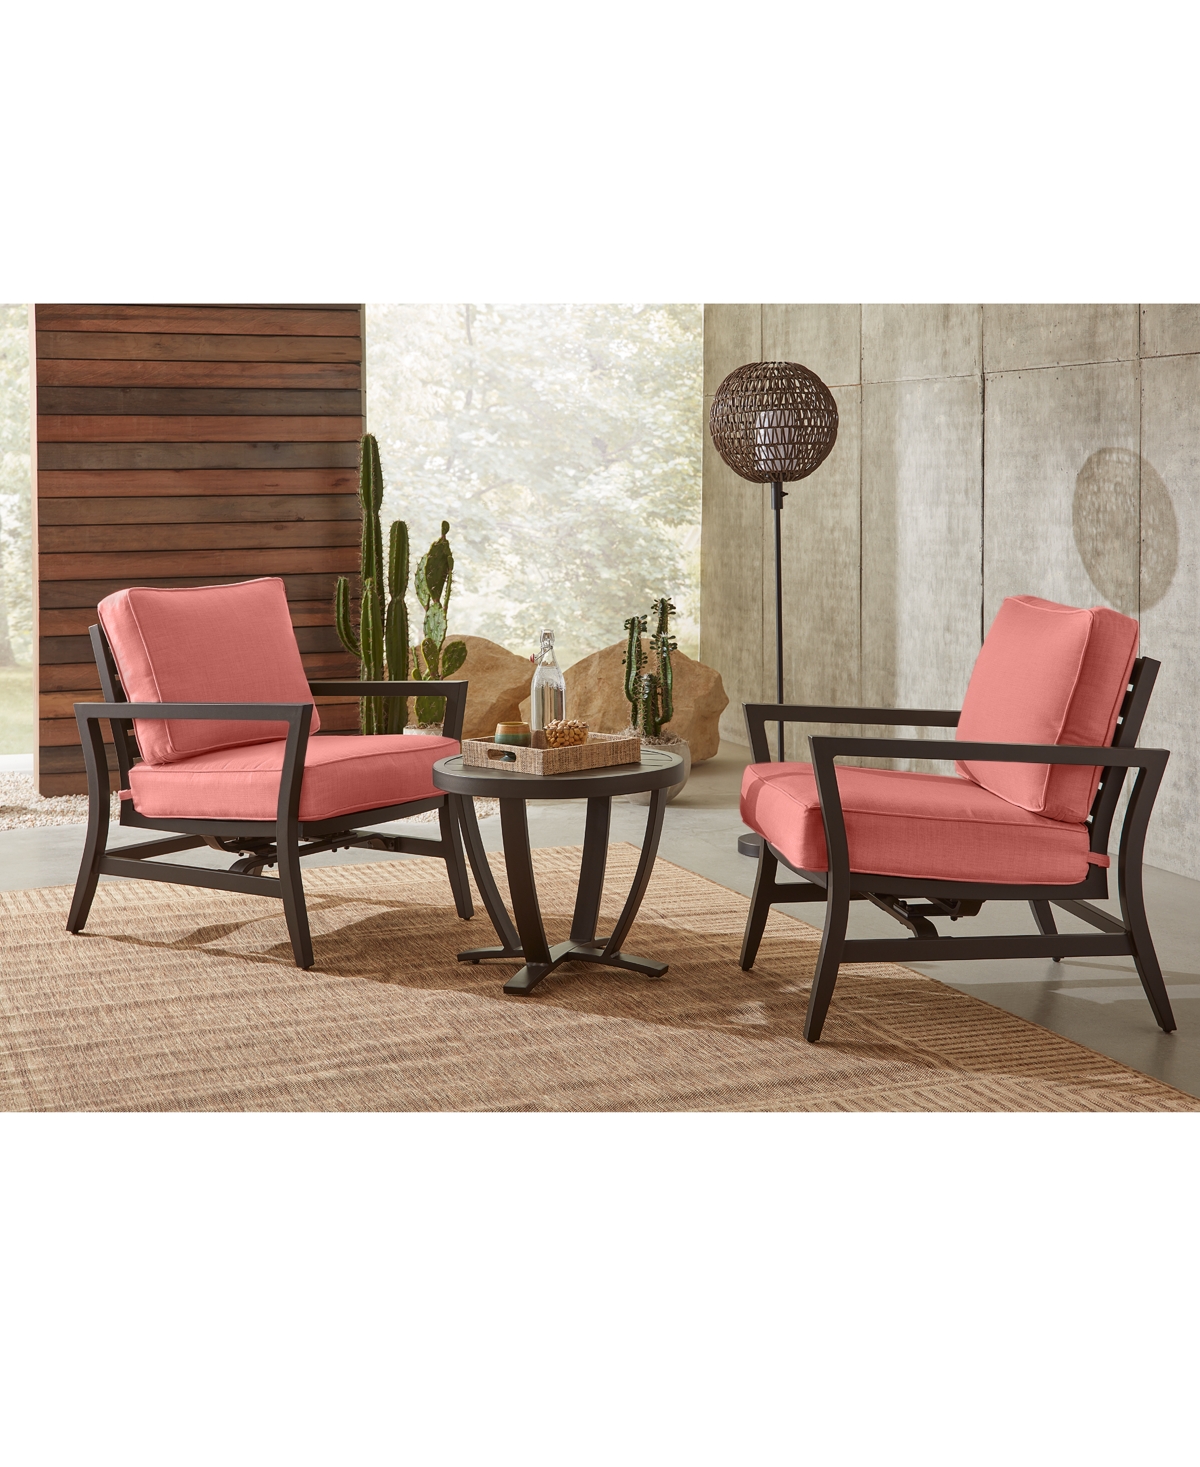 Shop Agio Astaire Outdoor 3-pc Rocker Chair Set (2 Rocker Chairs + 1 End Table) In Spa Light Blue